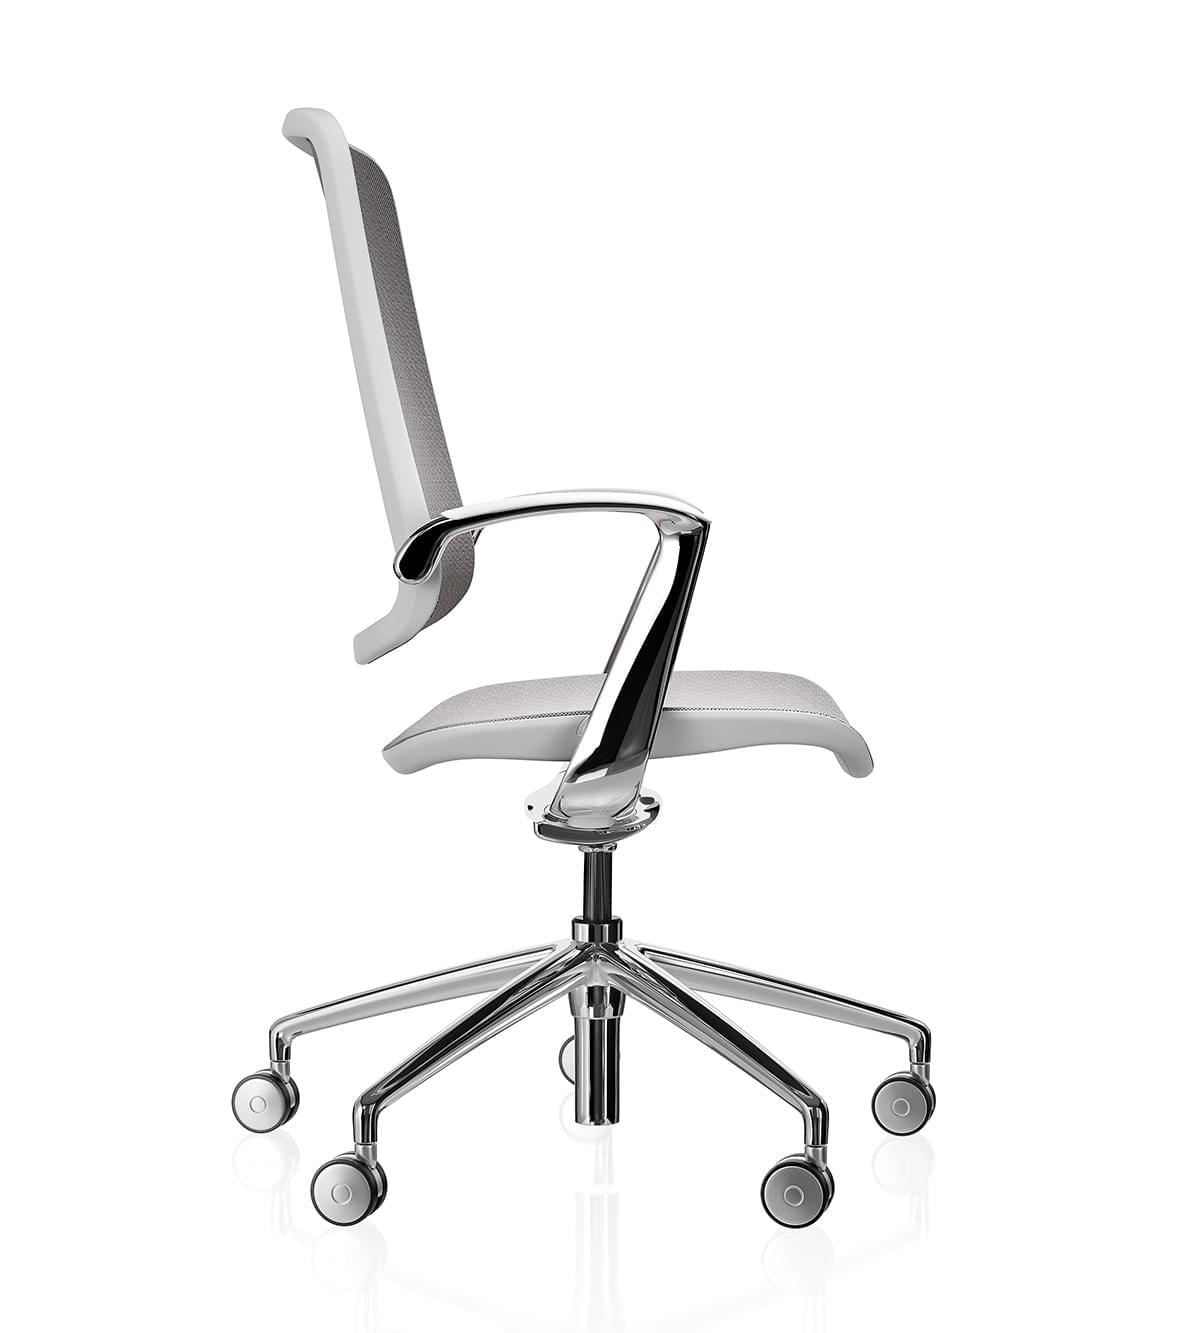 Trinetic Mesh Chair -White frame polished 5 star base with castors- side